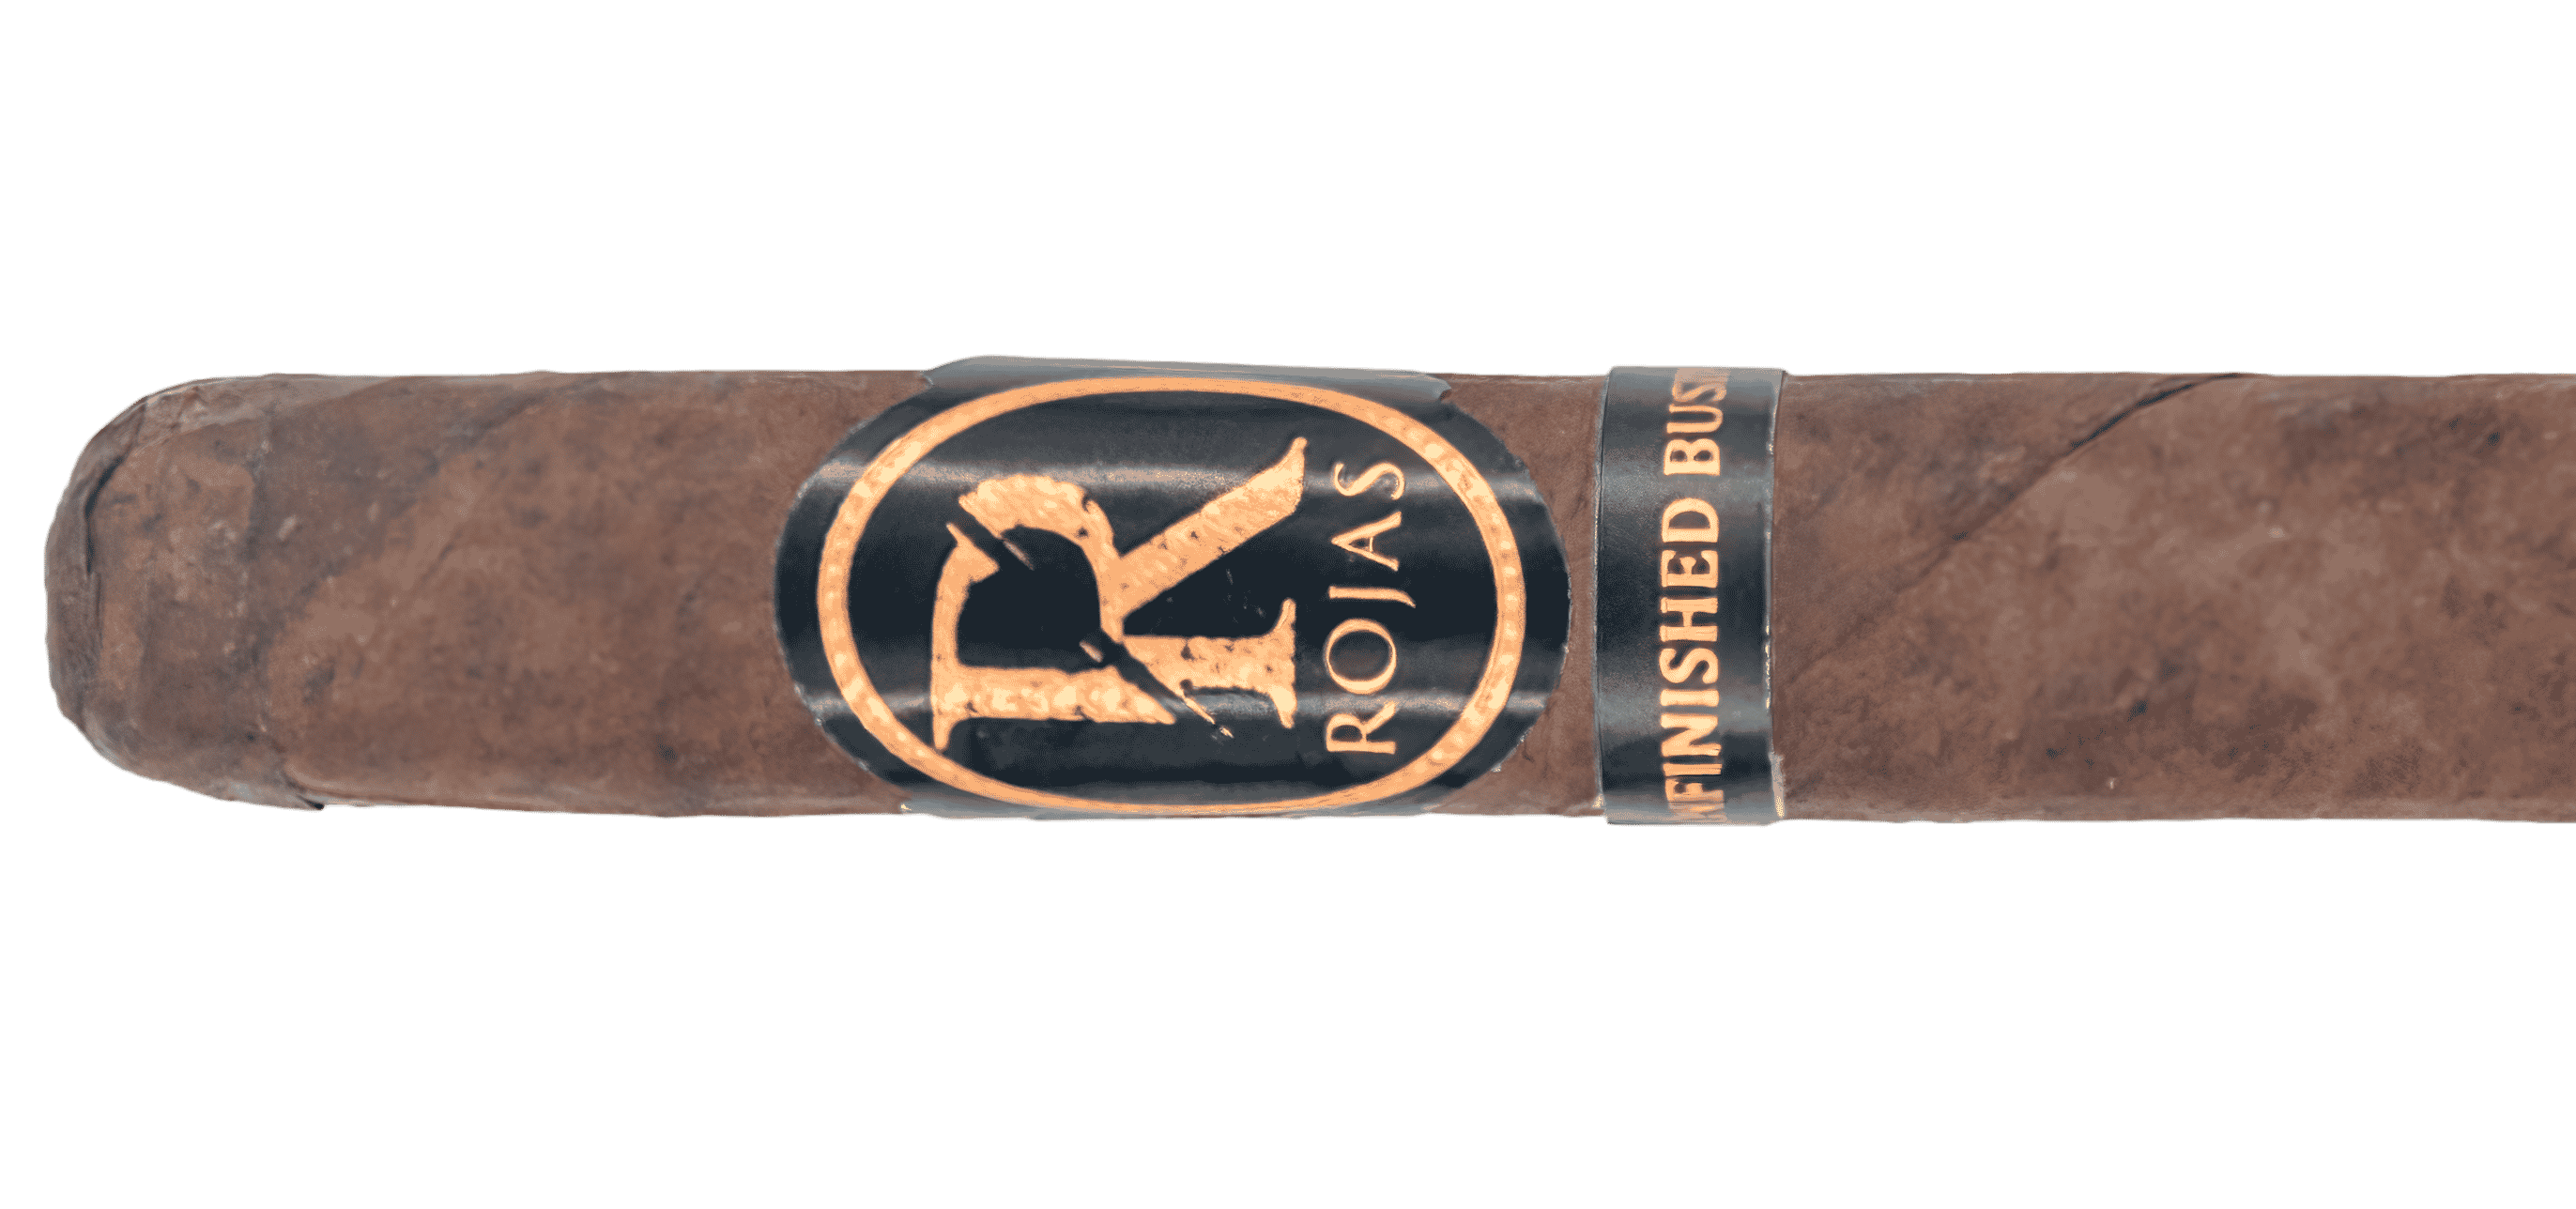 Rojas Unfinished Business Corona Gorda - Blind Cigar Review